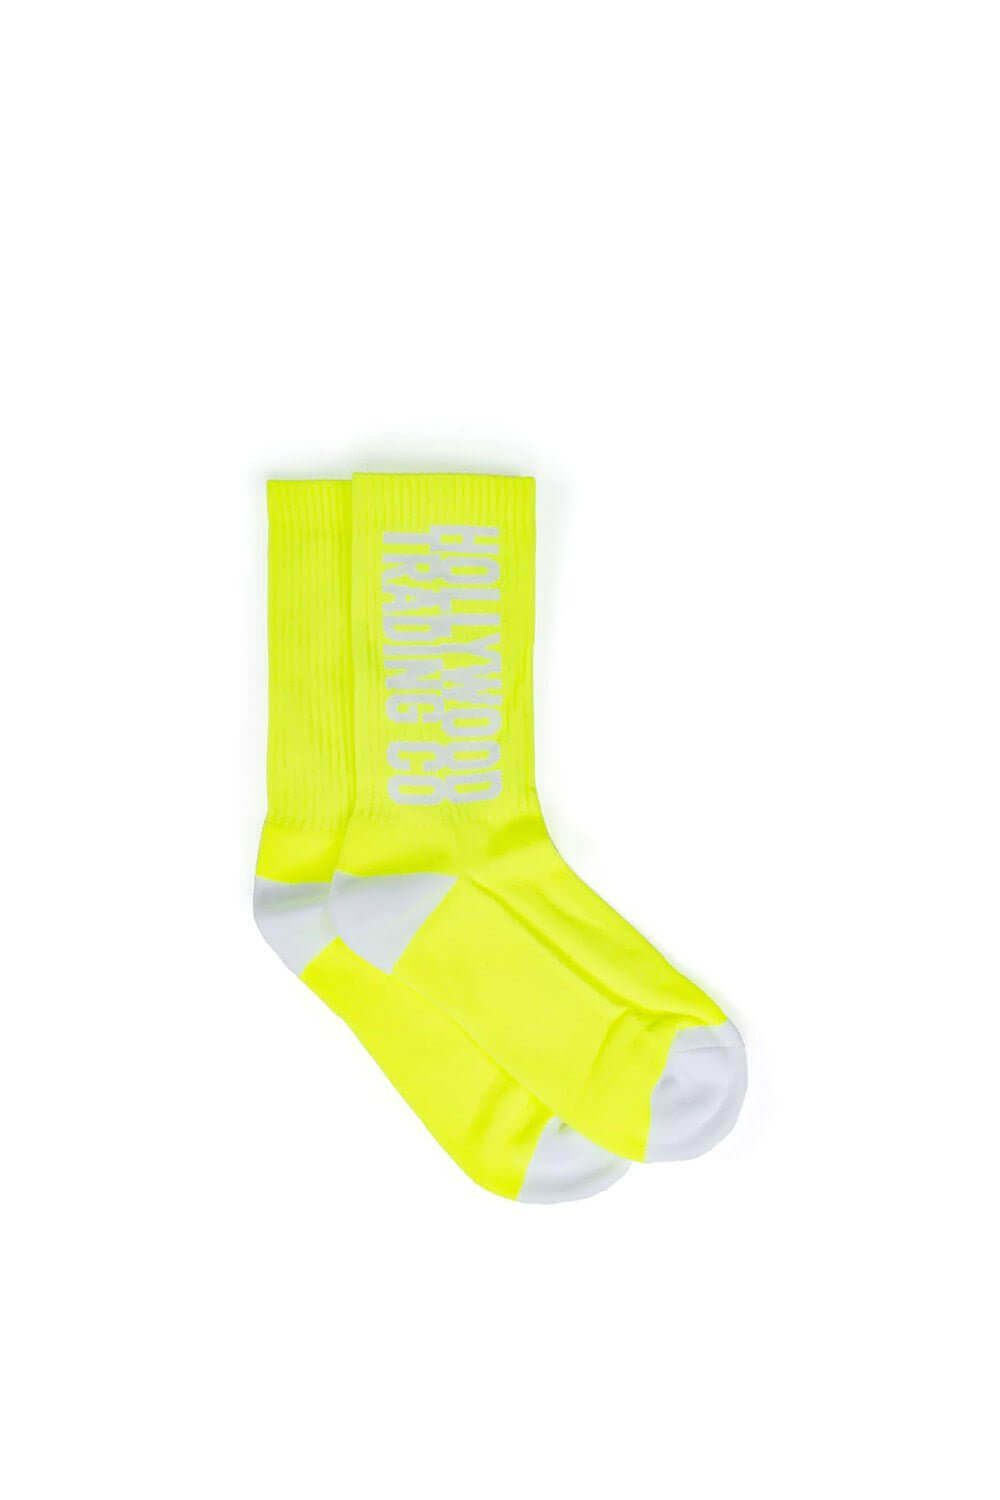 HOLLYWOOD T.C. NEON MAN SOCKS Signature man socks with Hollywood Trading Co script logo. 95% Cotton 5% Elastane. Made in Italy HTC LOS ANGELES